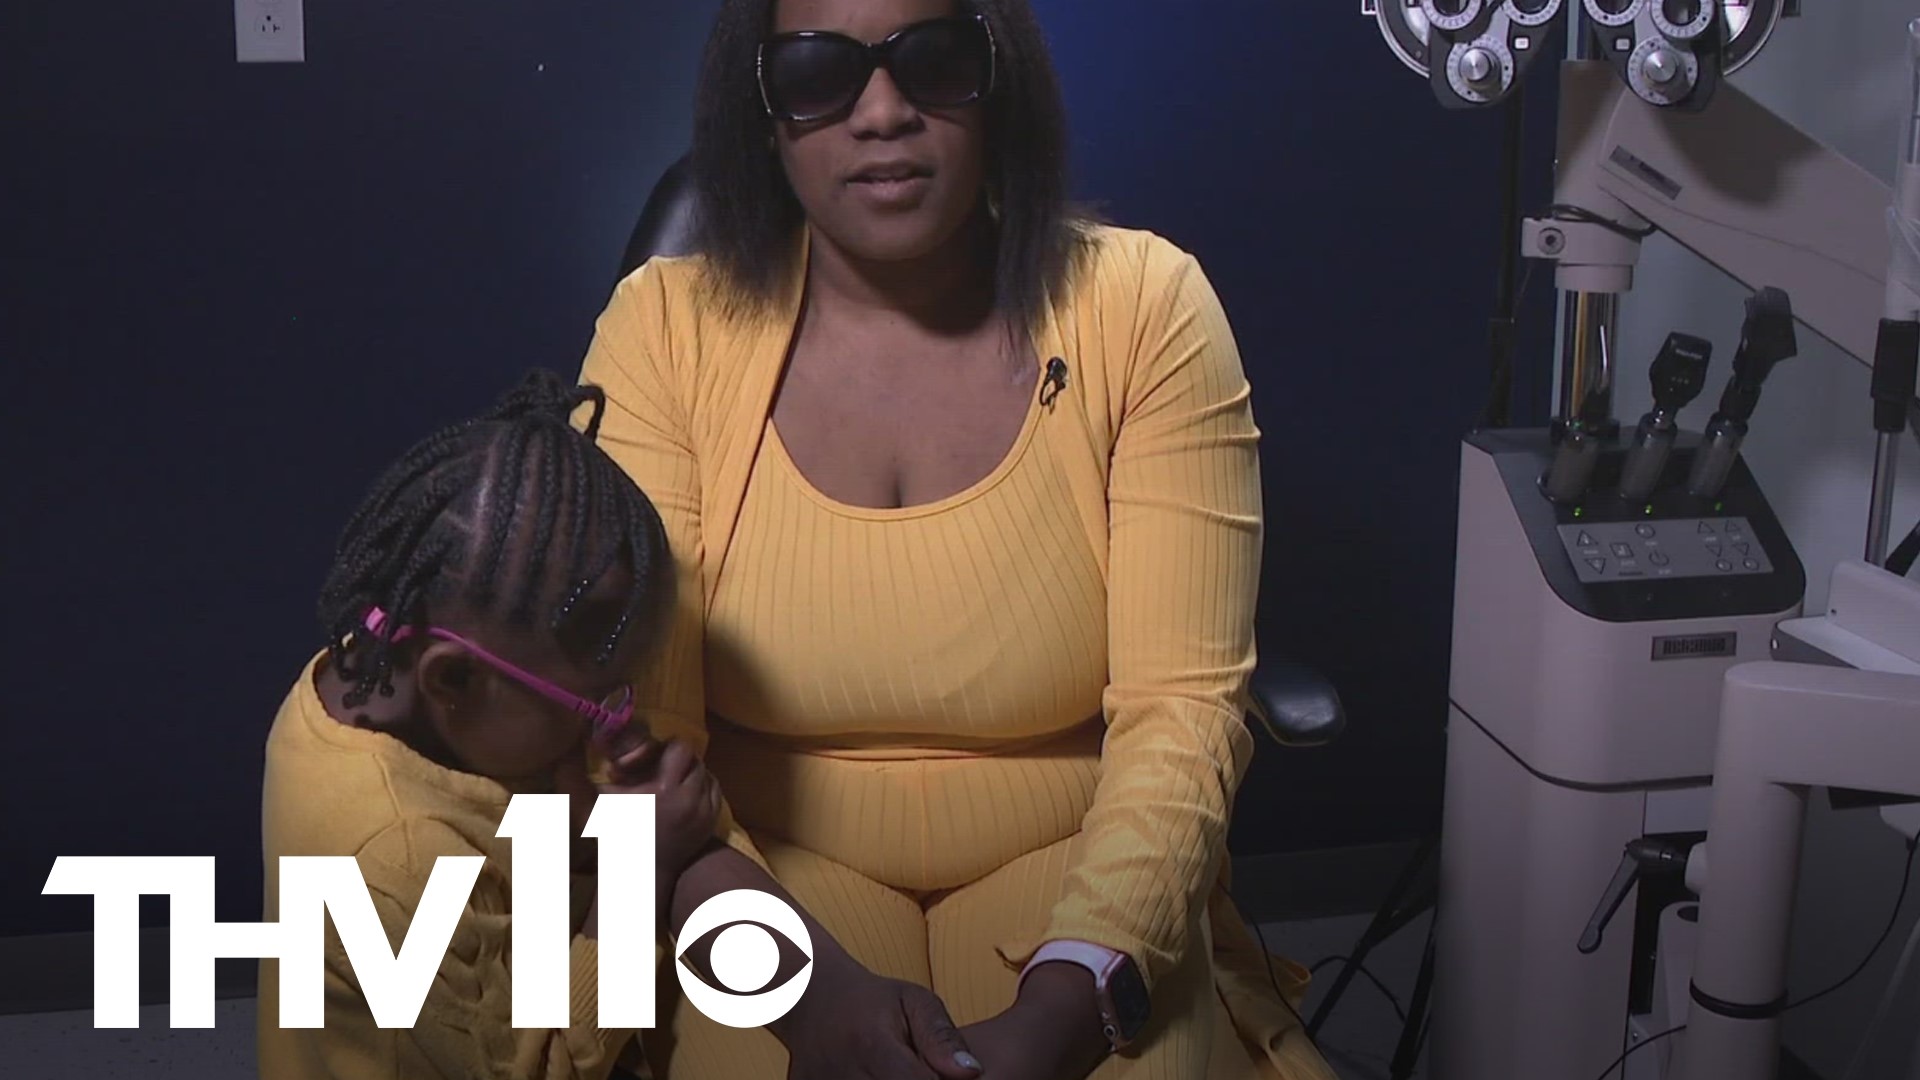 The ability to see is a beautiful thing, but imagine losing your eyesight— we're sharing the story of an Arkansas mom and daughter who battled the same condition